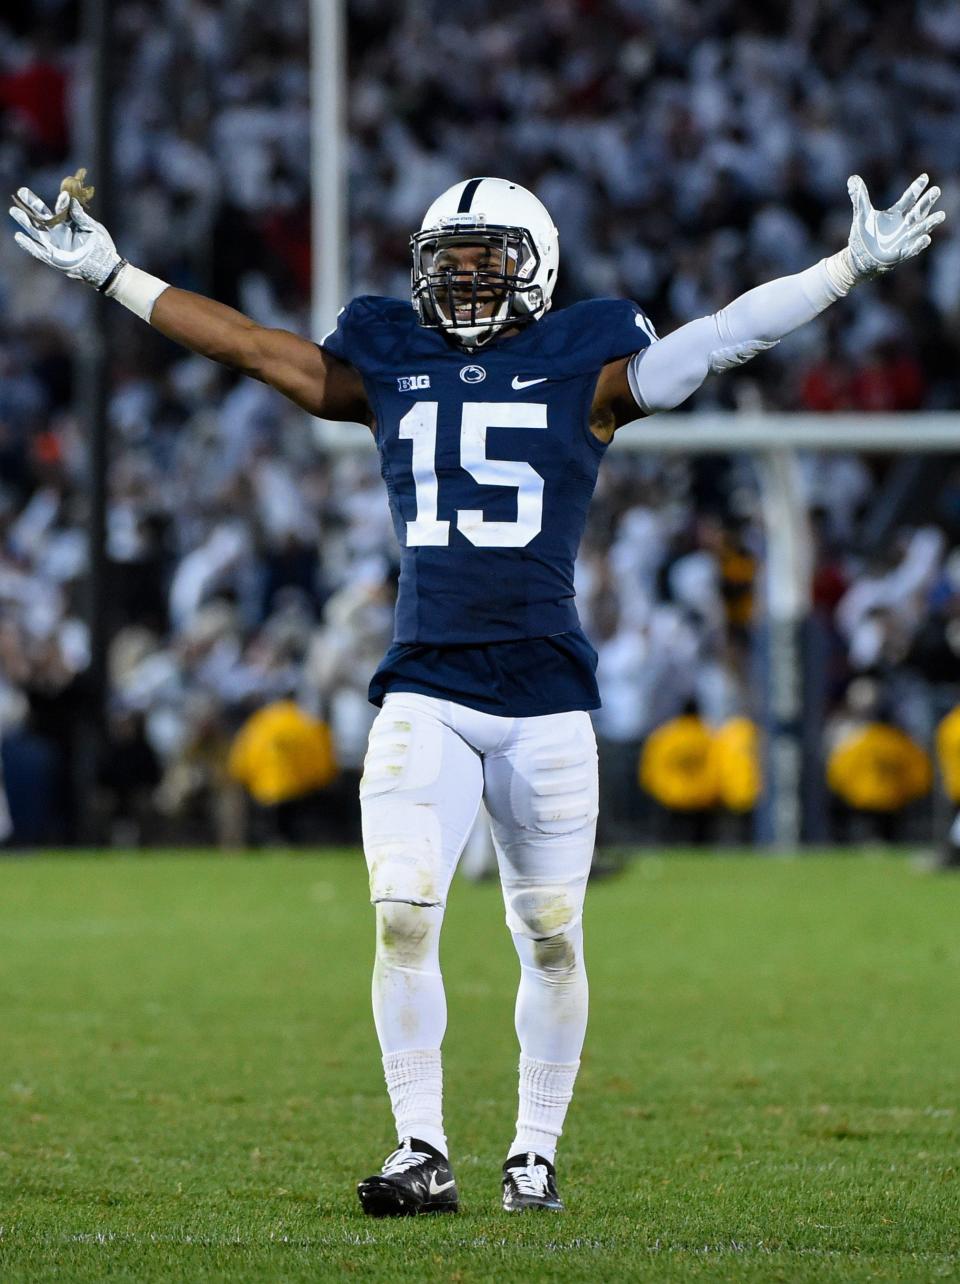 Oct 22, 2016; University Park, PA, USA; Penn State Nittany Lions cornerback Grant Haley (15) reacts against the Ohio State Buckeyes during the fourth quarter at Beaver Stadium. Penn State defeated Ohio State 24-21. Mandatory Credit: Rich Barnes-USA TODAY Sports